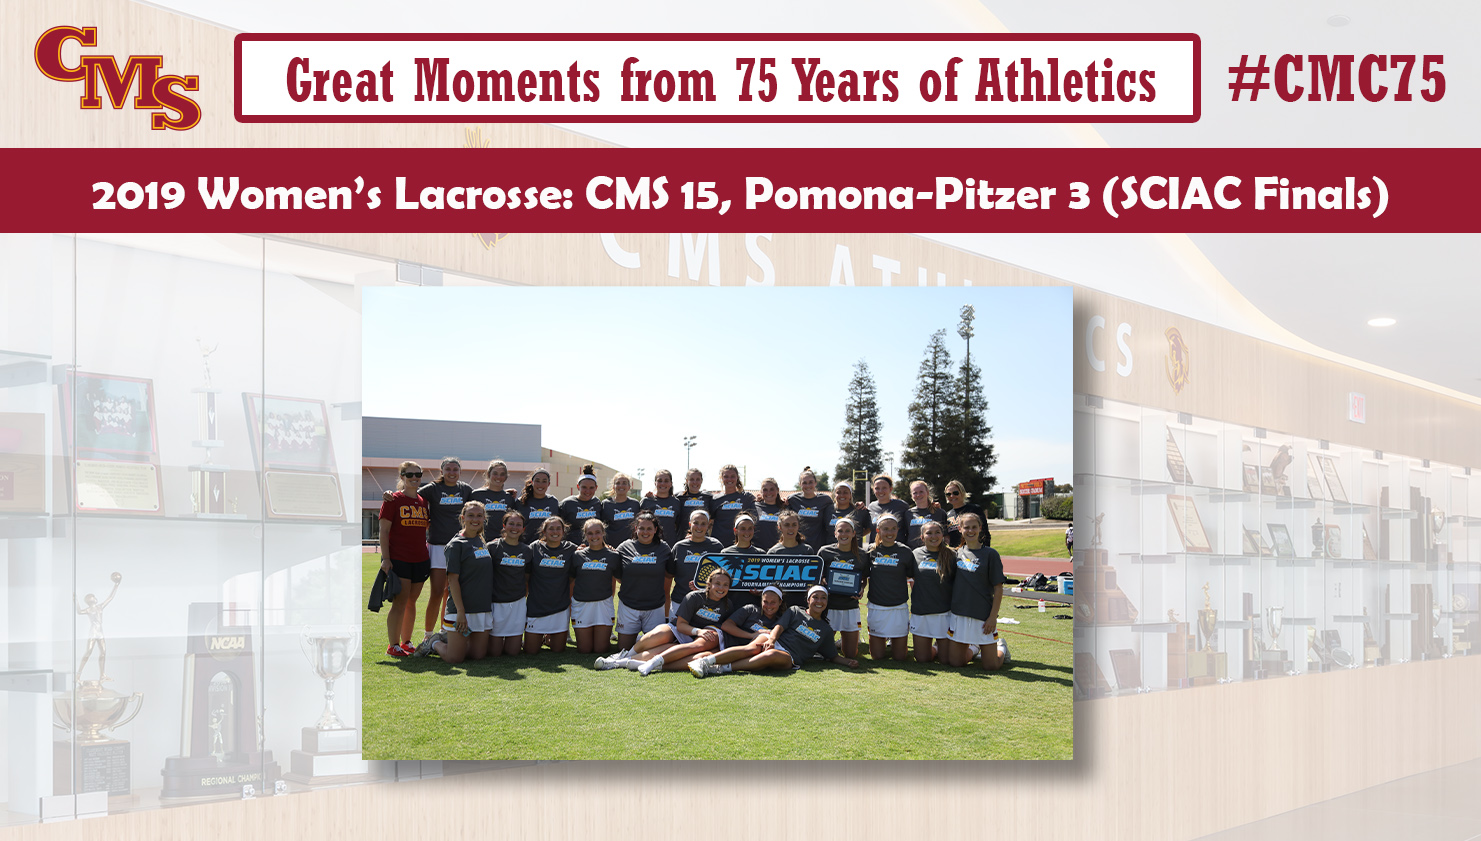 The 2019 CMS women's lacrosse team celebrates its SCIAC title. Words read: Great Moments from 75 Years of Athletics: 2019 Women's Lacrosse: CMS 15, Pomona-Pitzer 3 (SCIAC Finals).